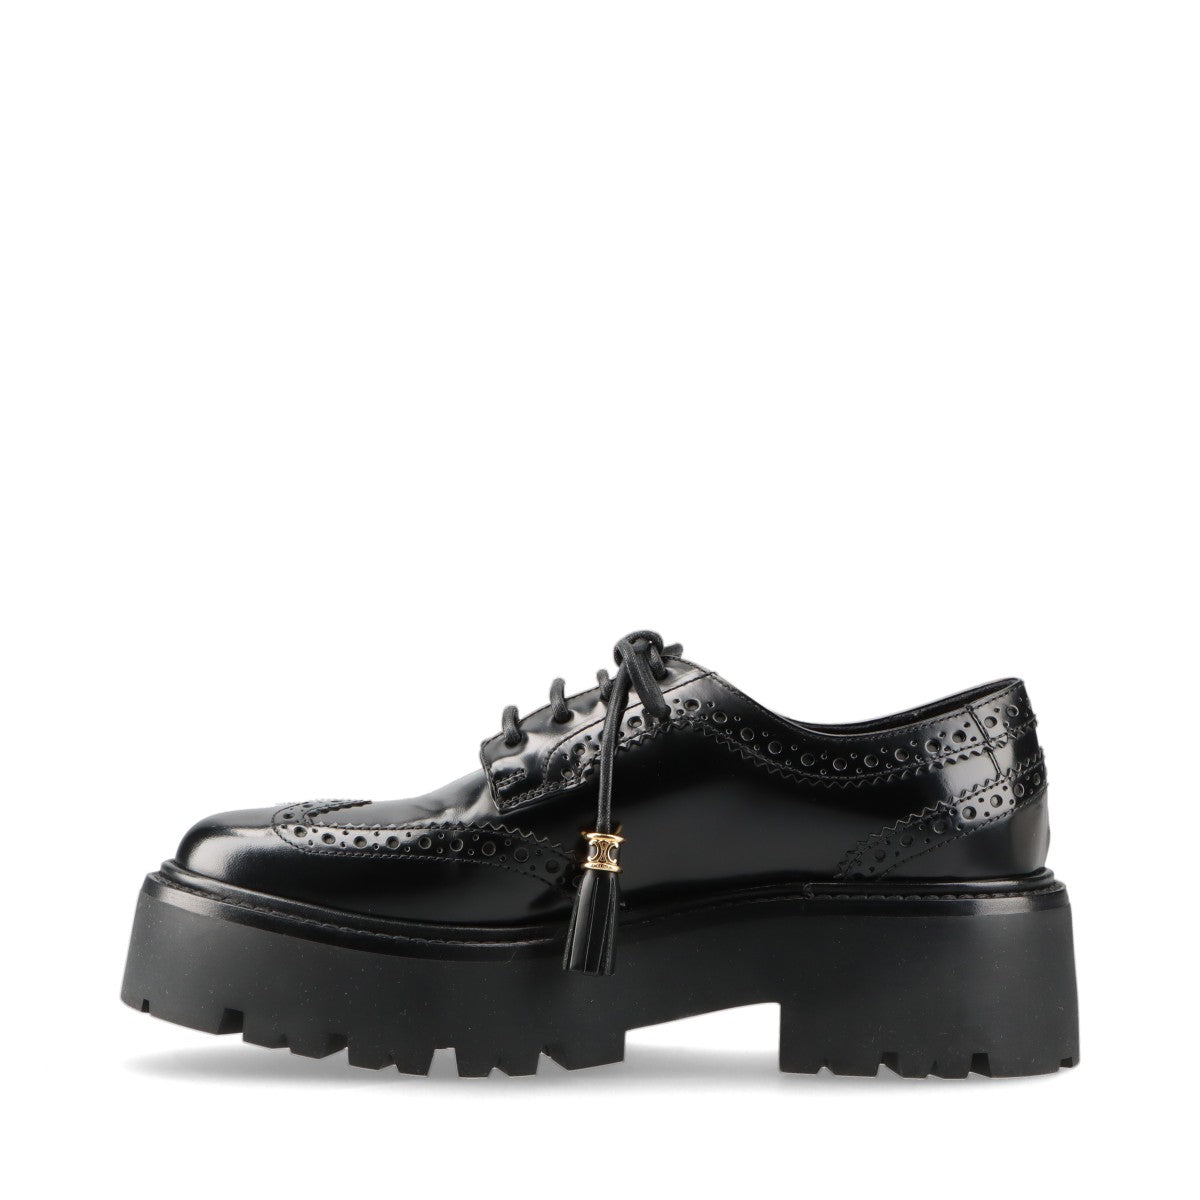 CELINE bulky 22AW Leather Dress shoes 36 Ladies' Black BE0252 Brogue derby Triomphe tassels Thick bottom There is a replacement string